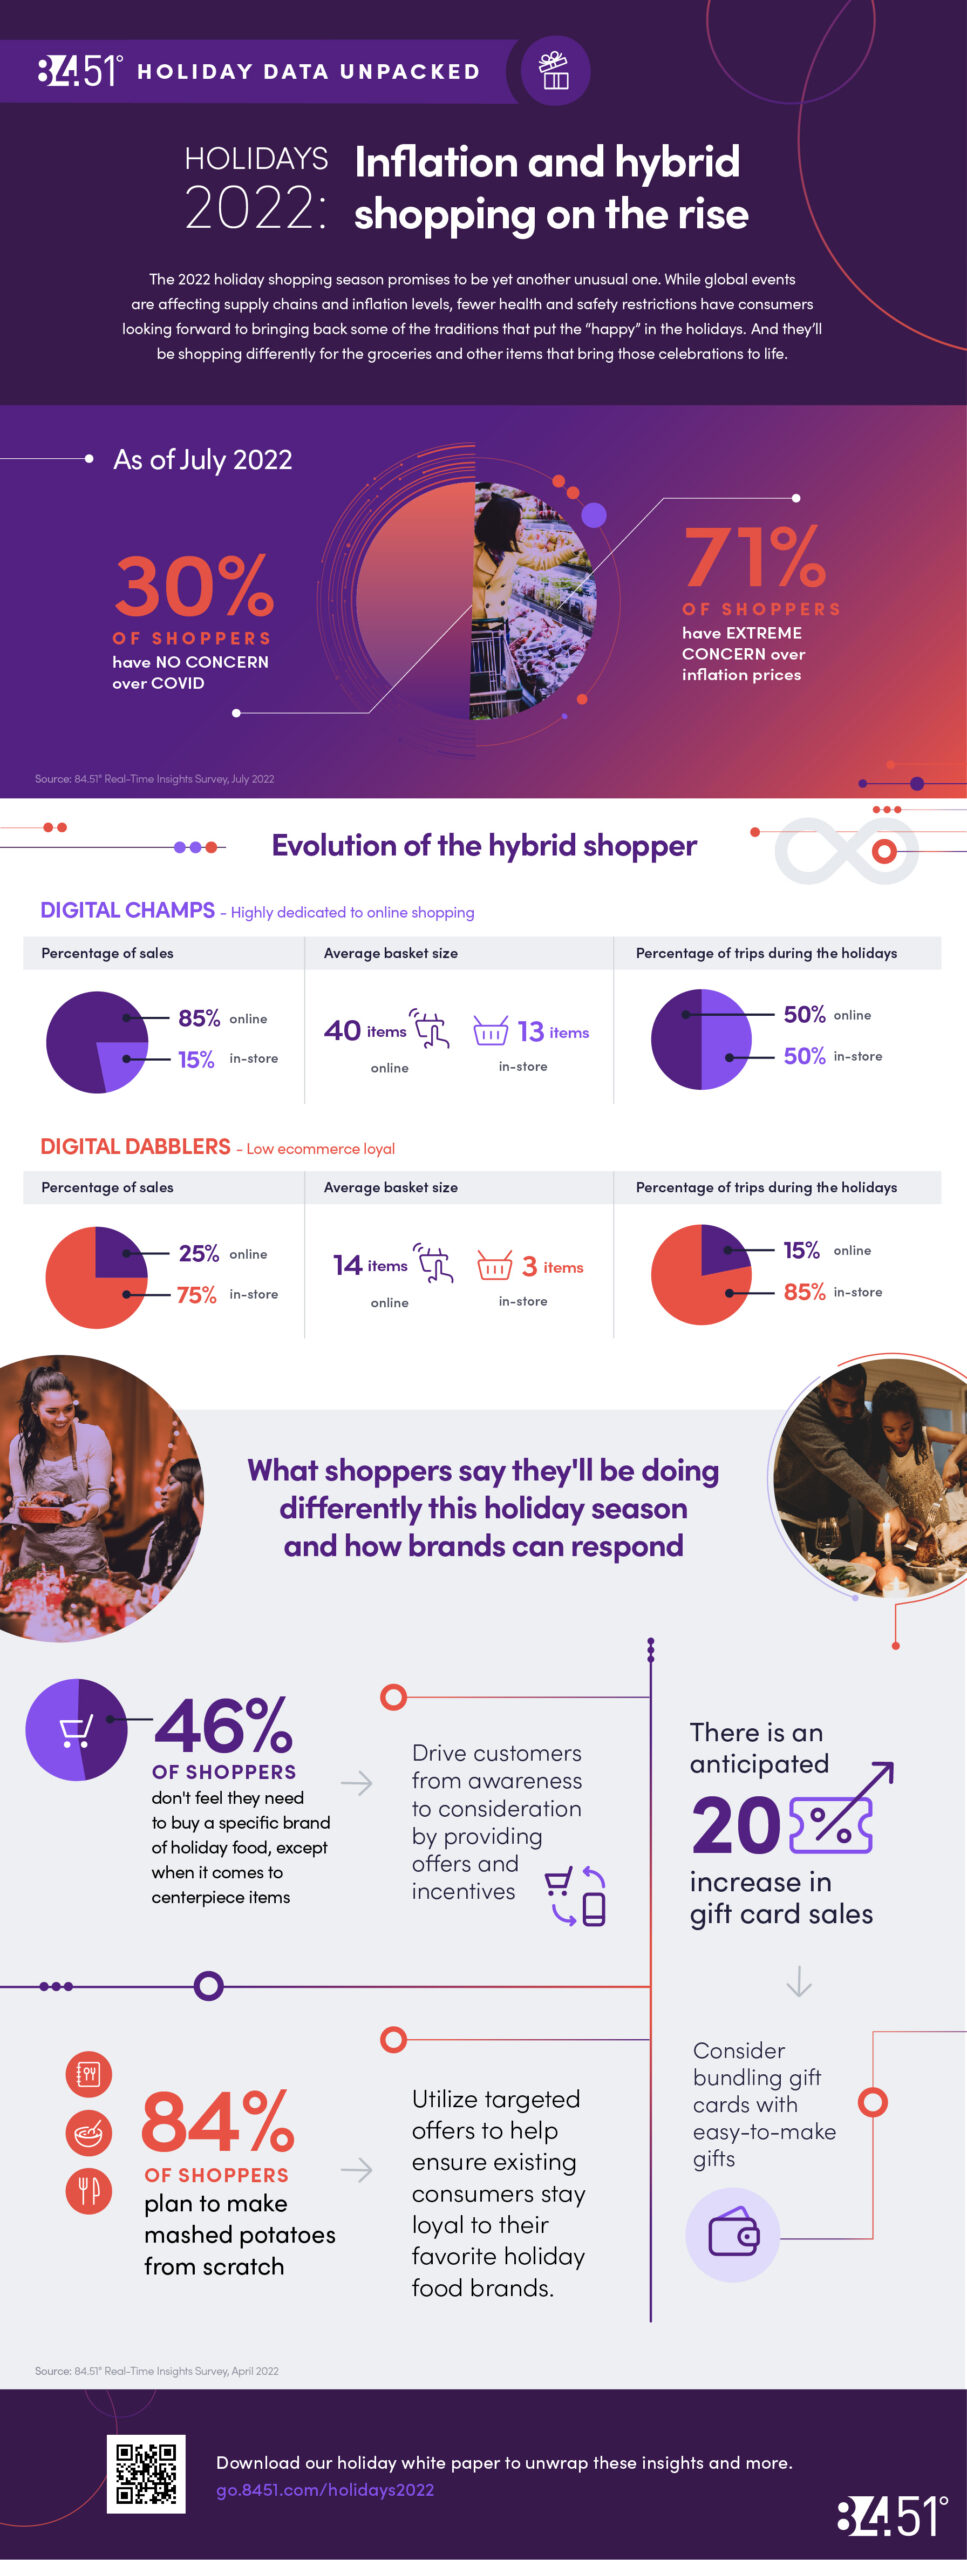 Even Ecommerce Enthusiasts ‘Go Physical’ for Holiday Shopping